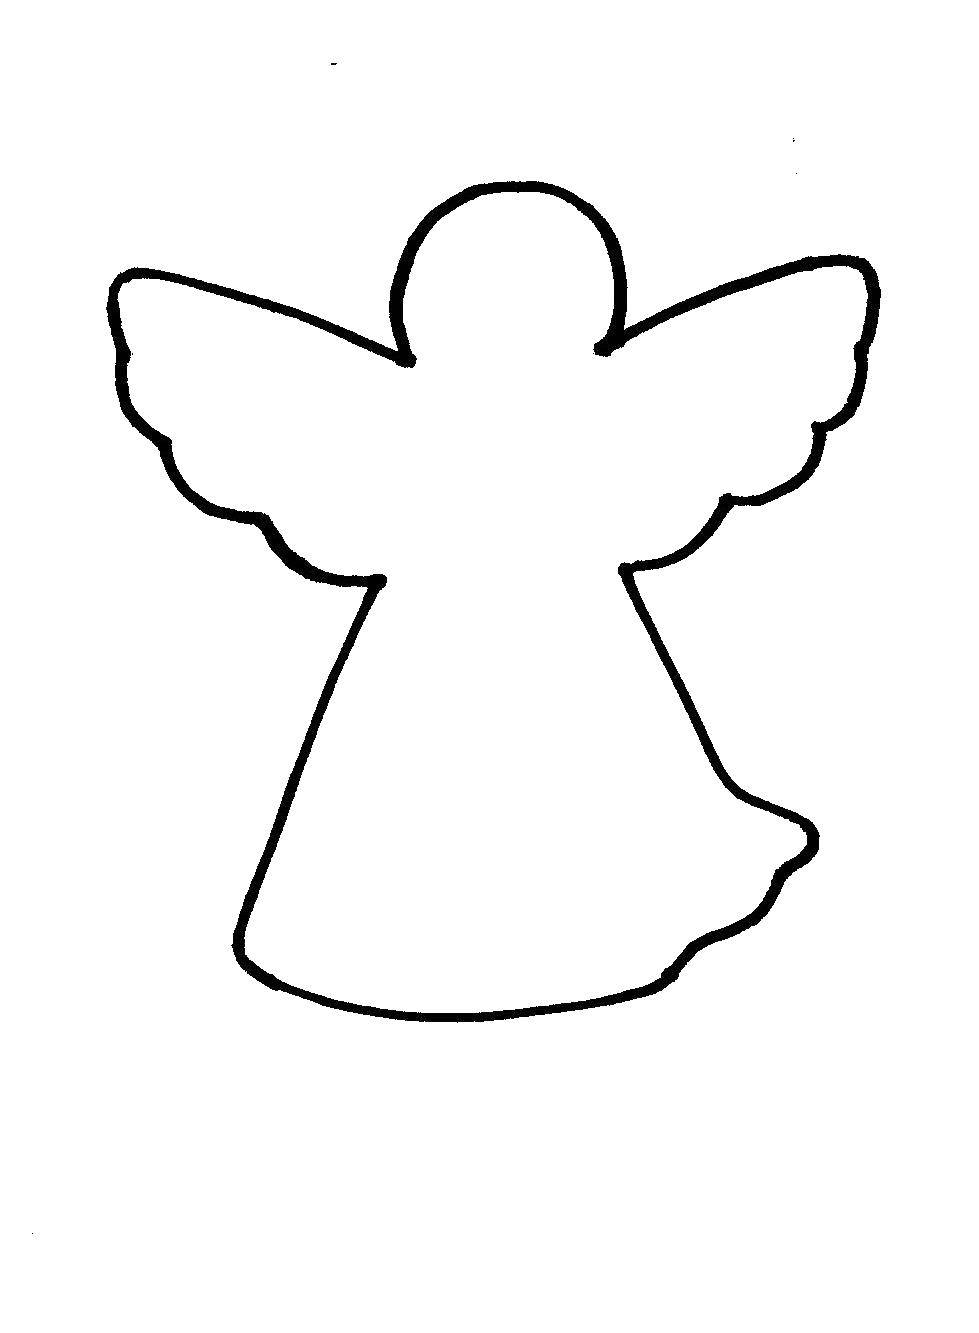 Coloring The contour angel. Category The contours of the angel to clip. Tags:  Outline .